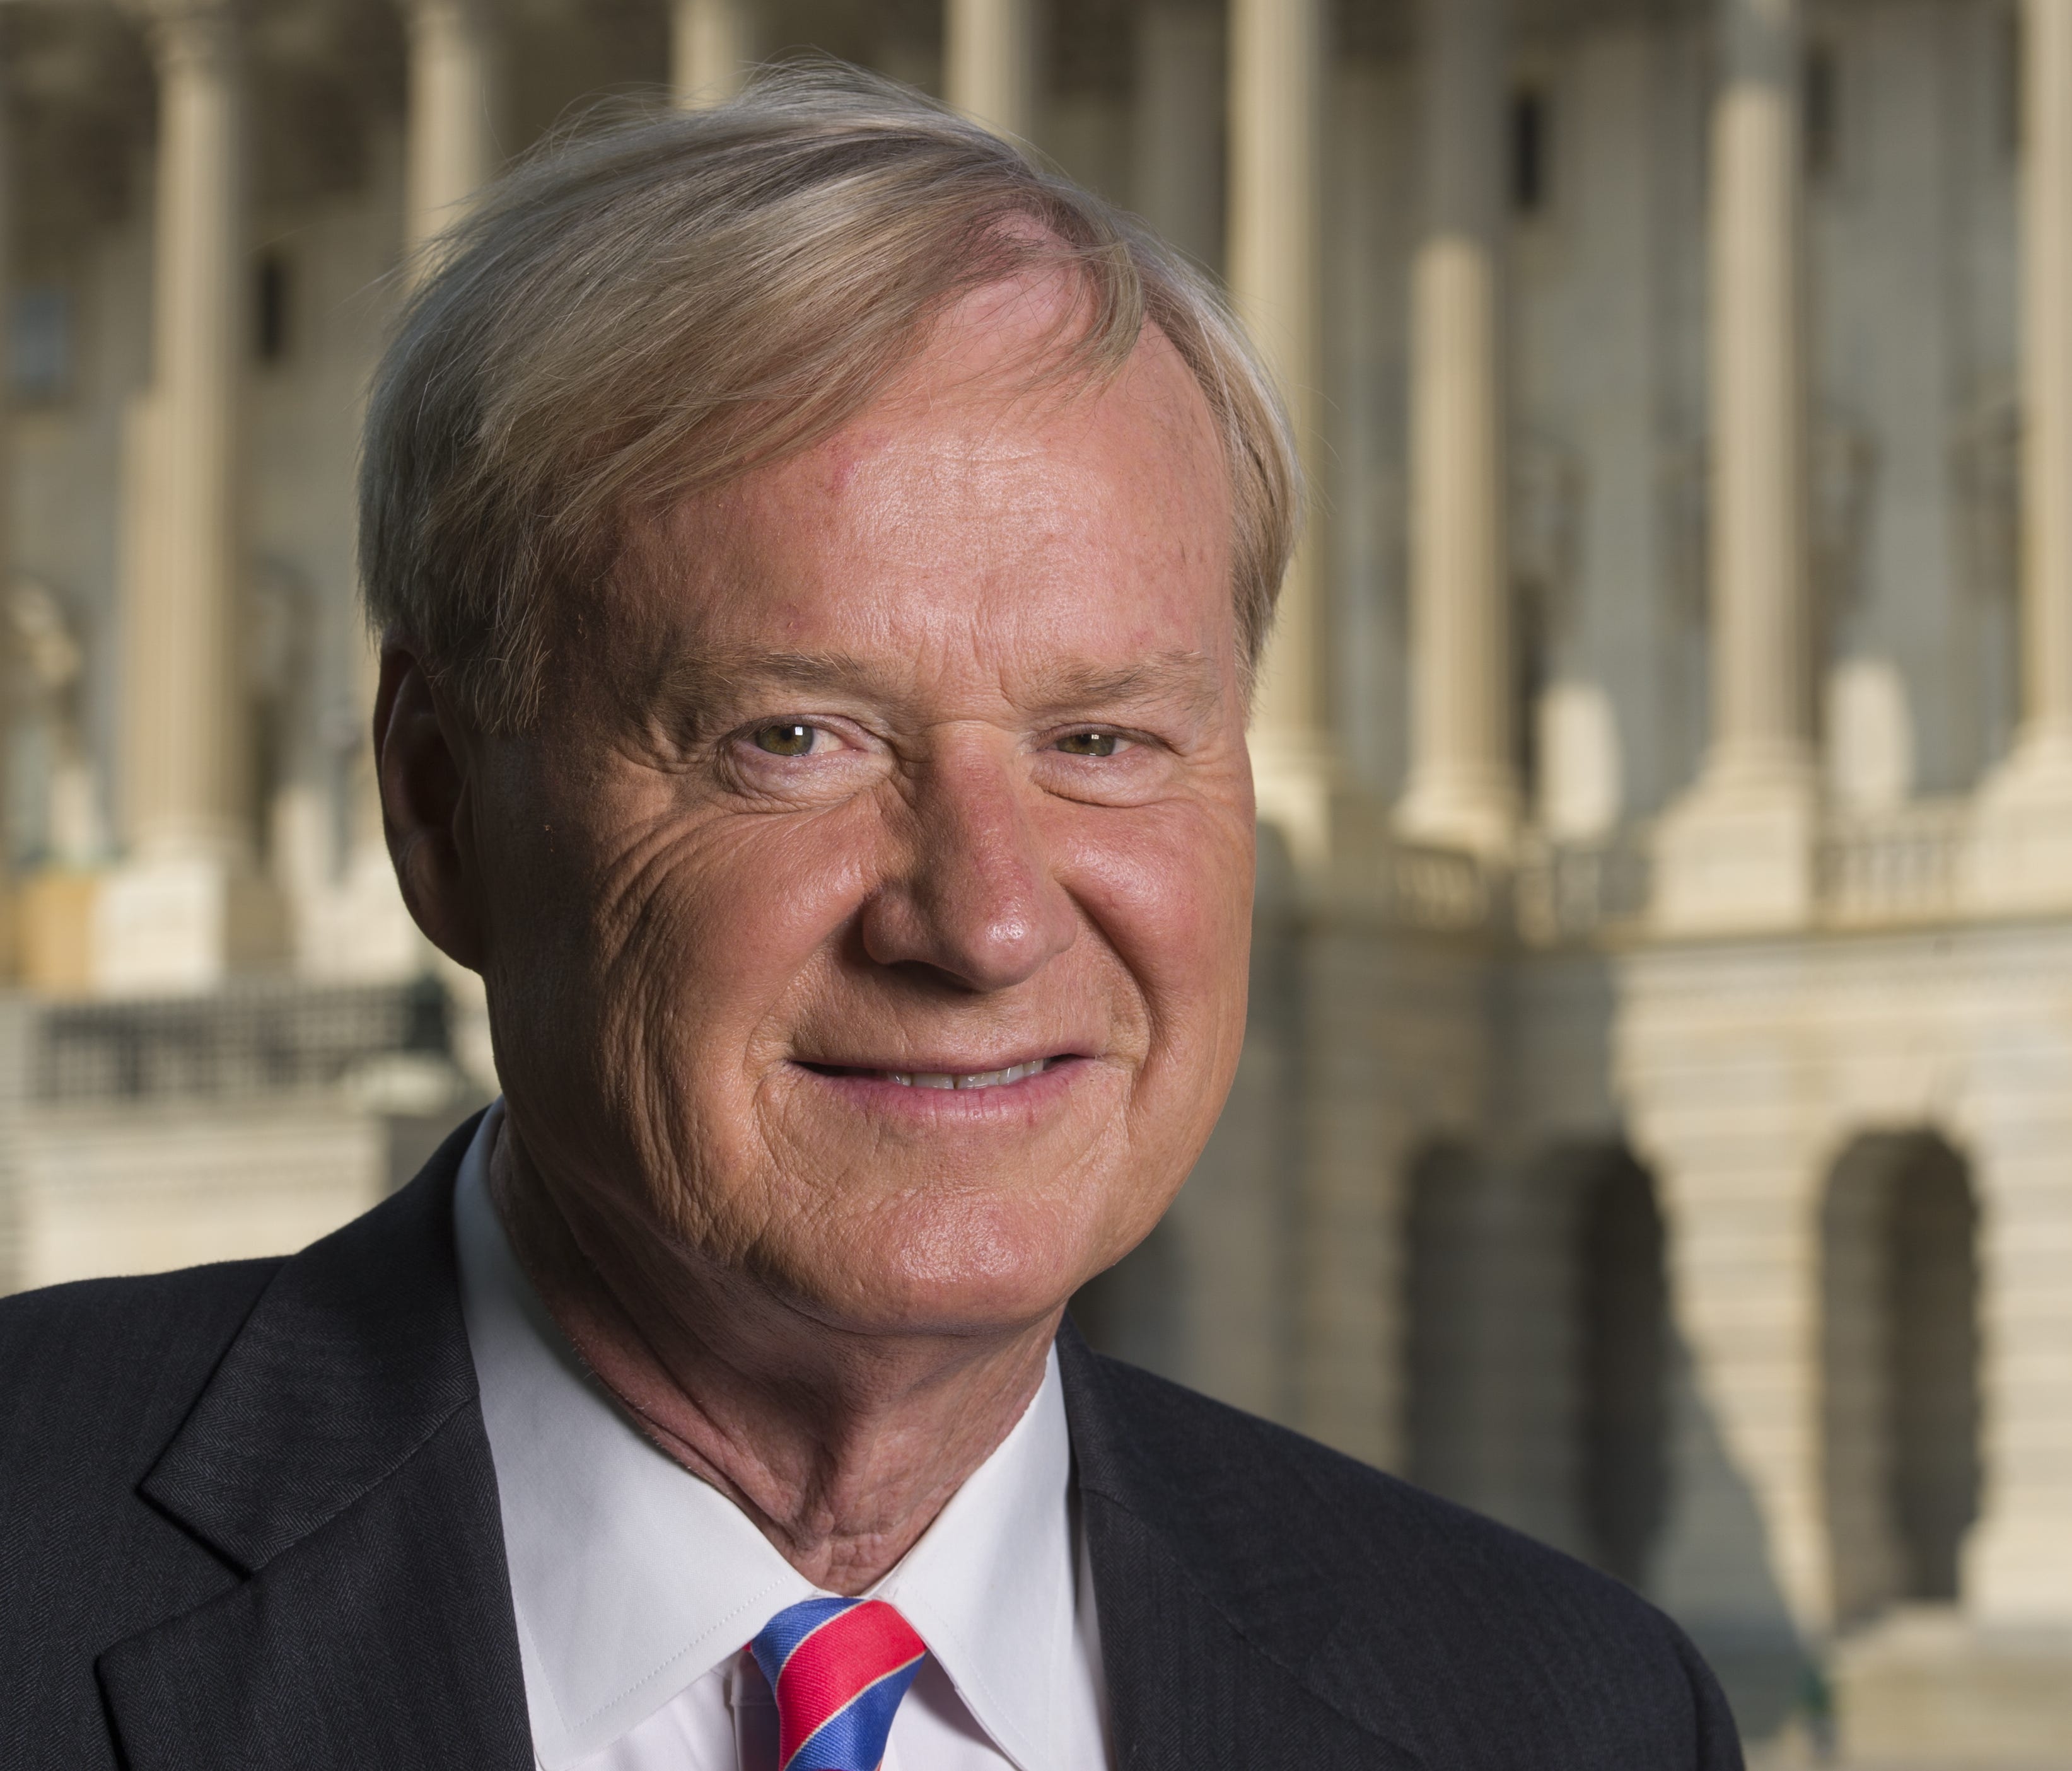 MSNBC TV personality Chris Matthews on the grounds of the Capitol building in Washington, D.C., on Aug. 27, 2013.